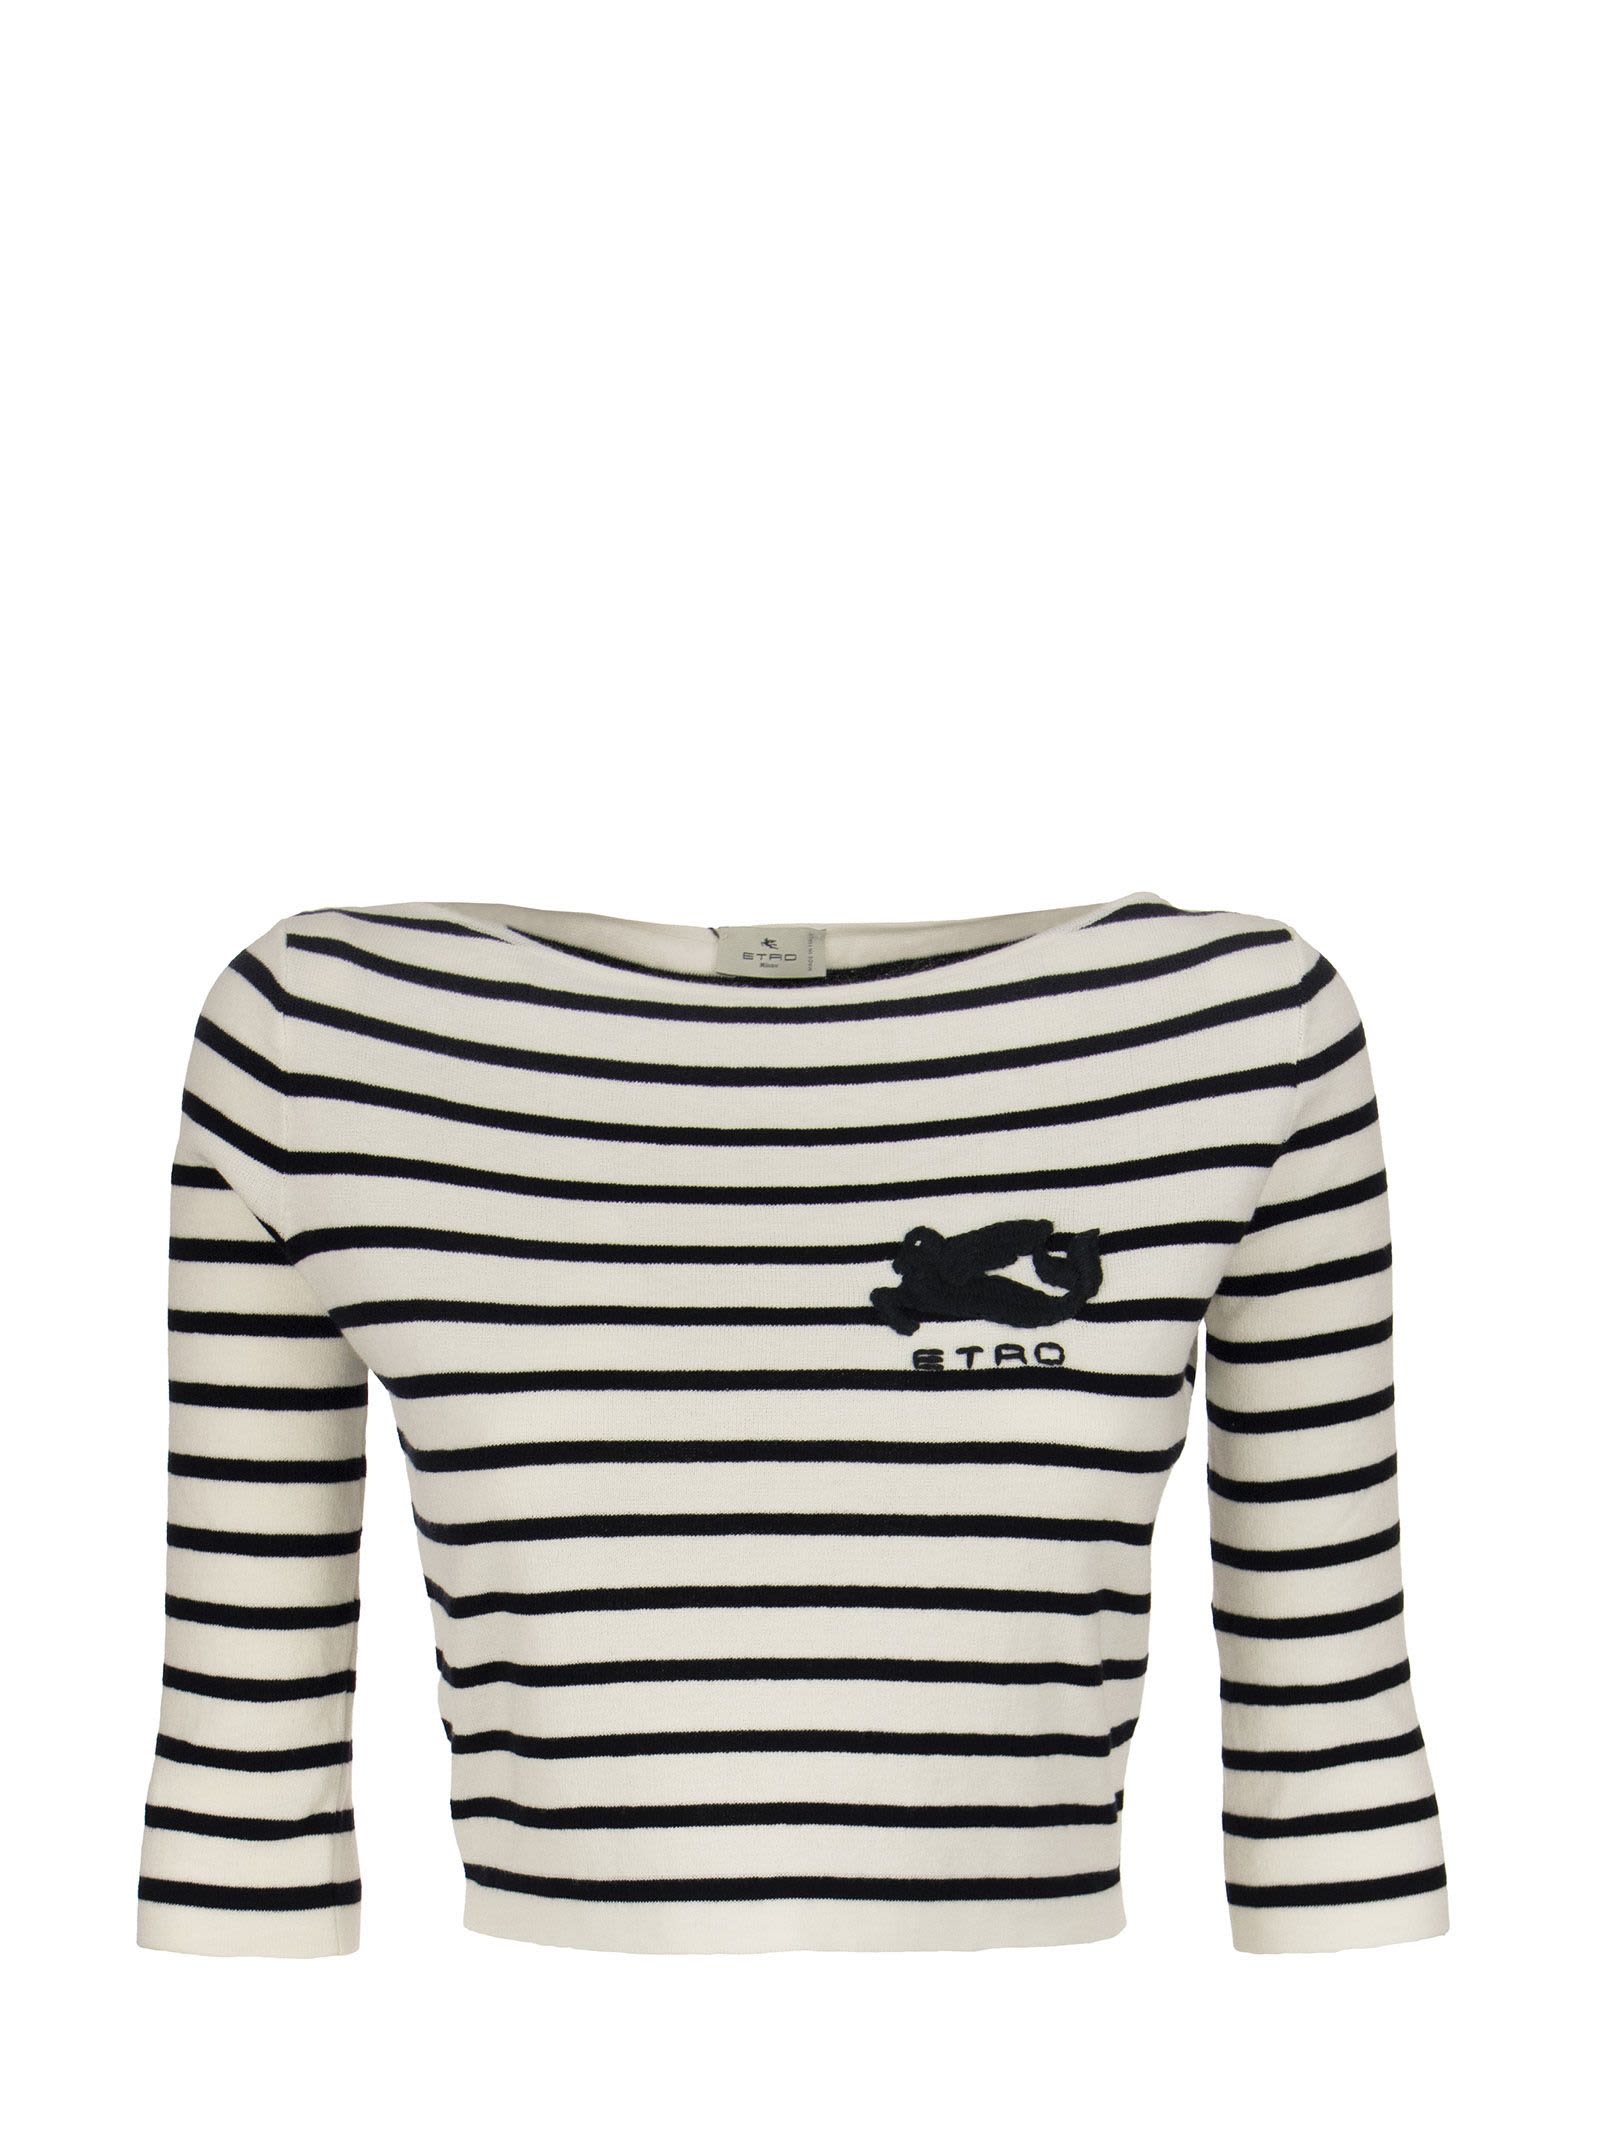 Etro Cotton Short Striped Sweater With Embroidered Pegaso